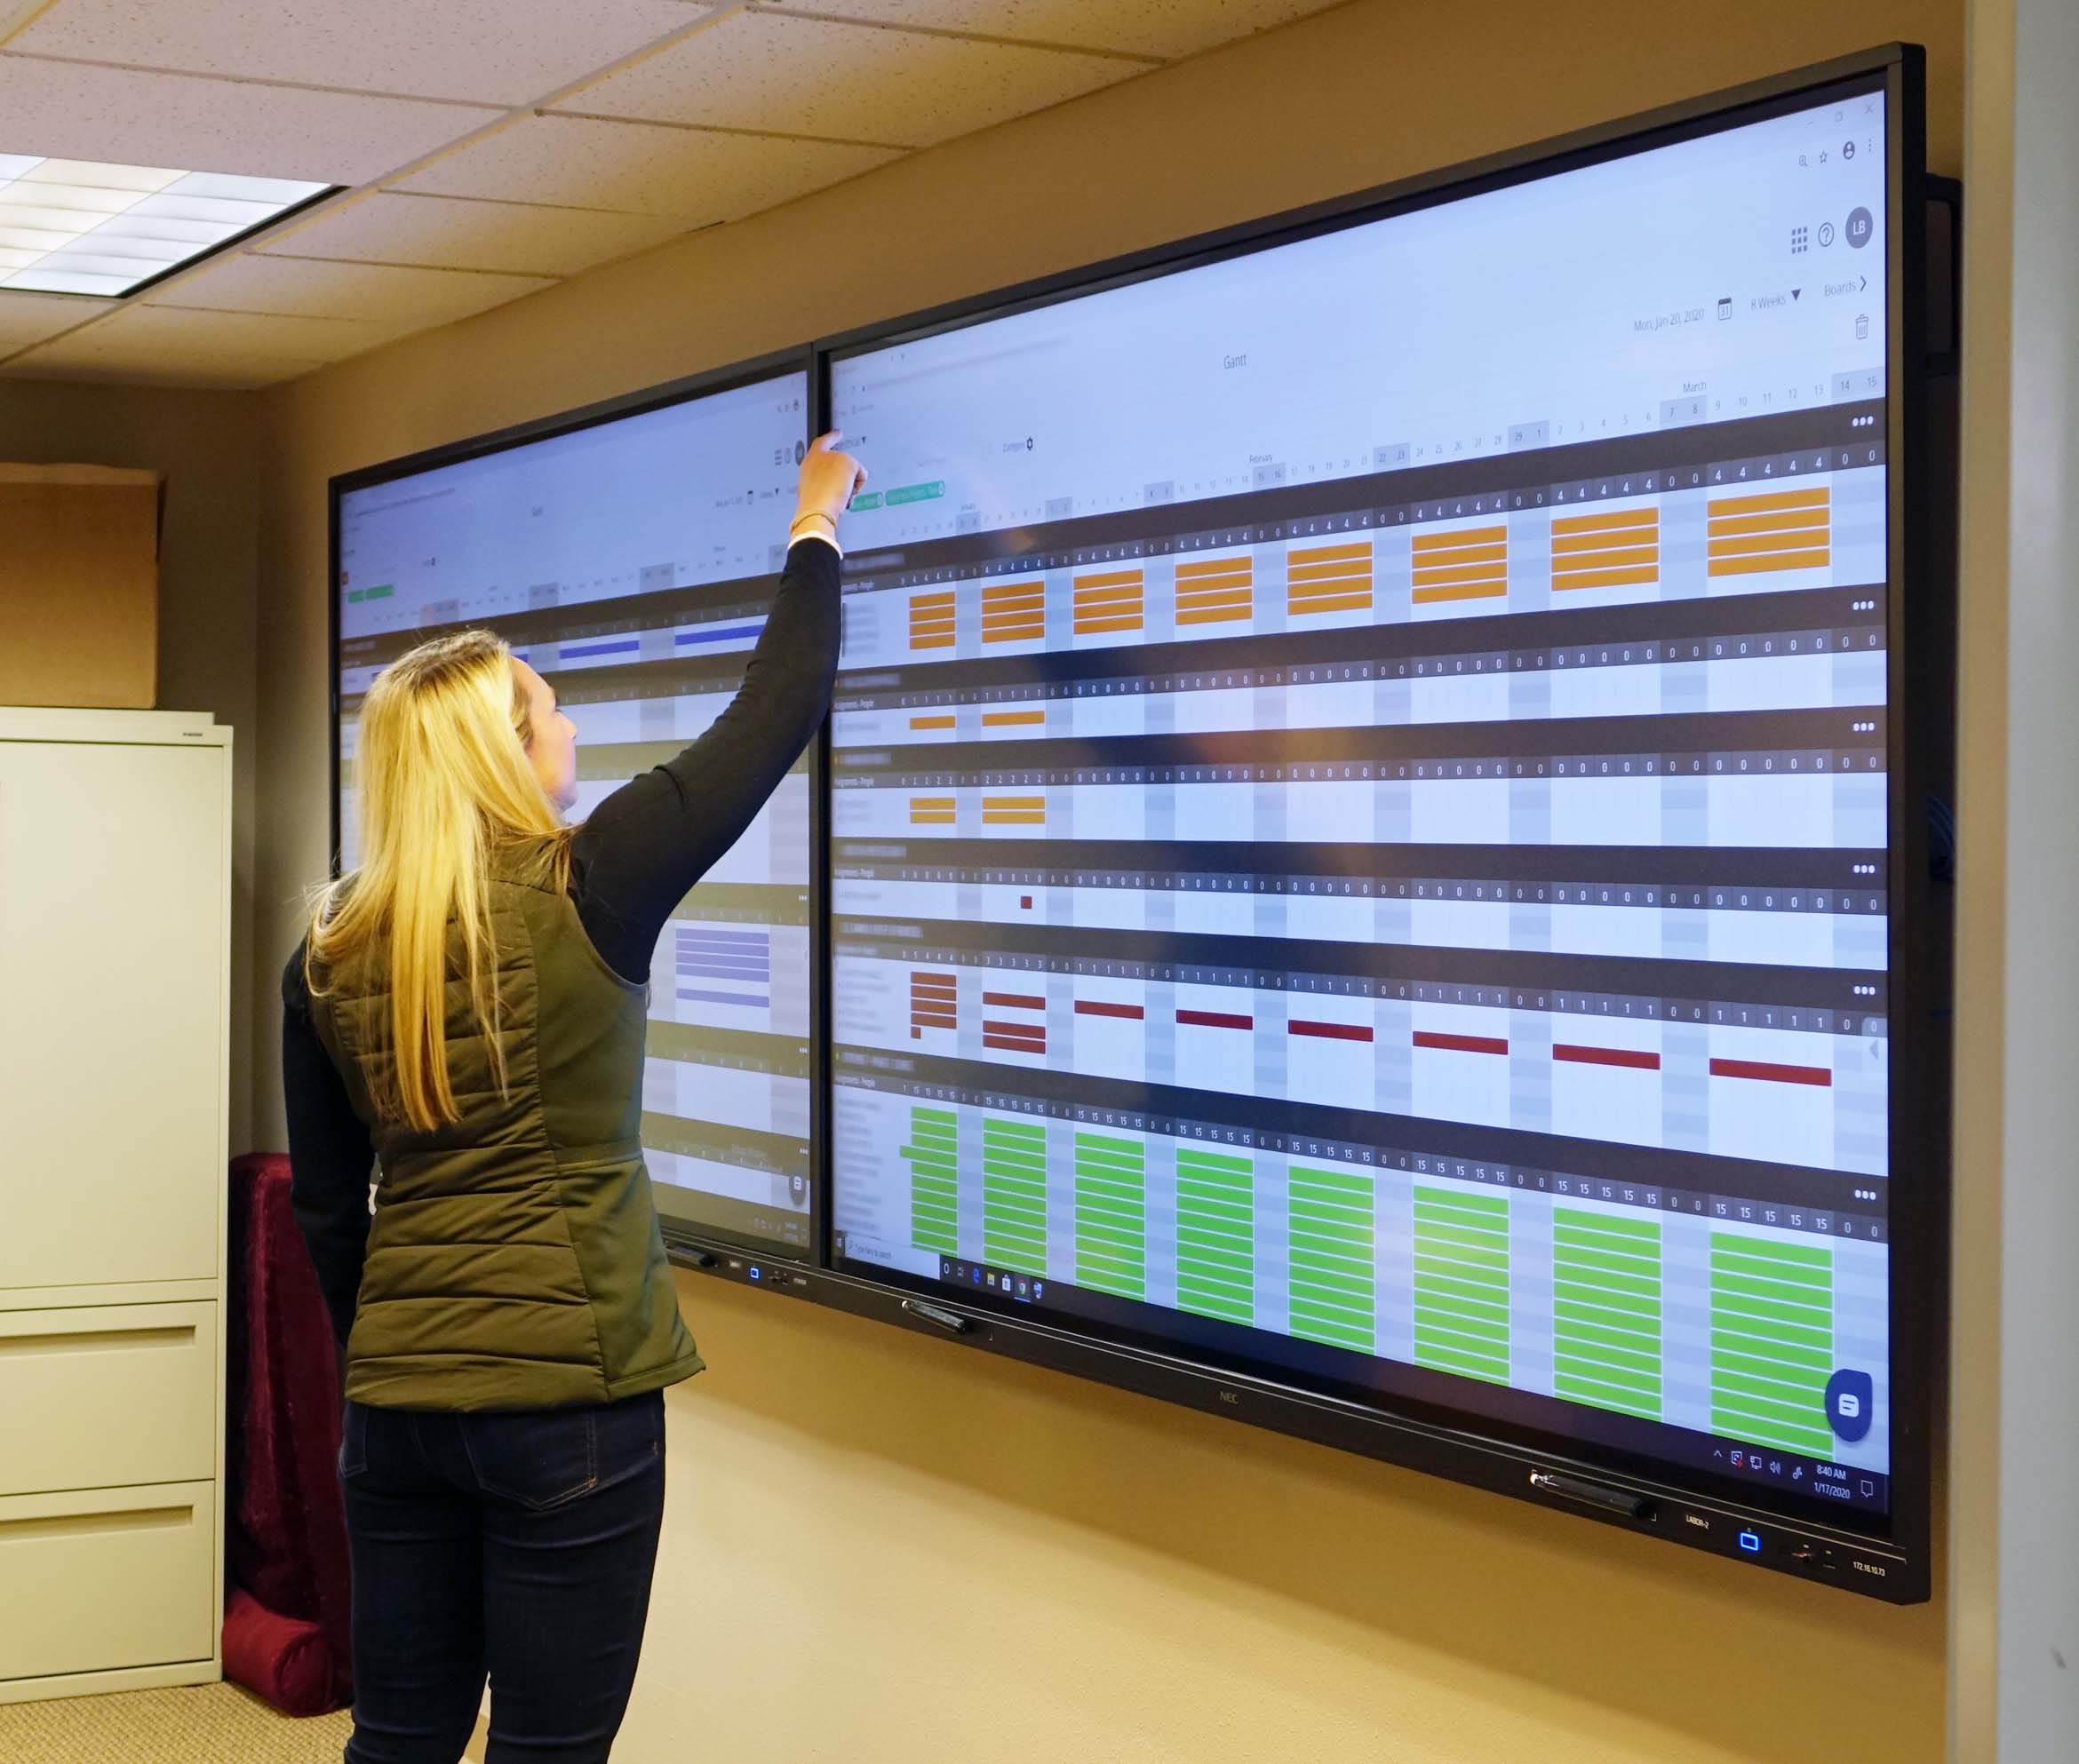 WBE and LaborChart Reinvent the Whiteboard